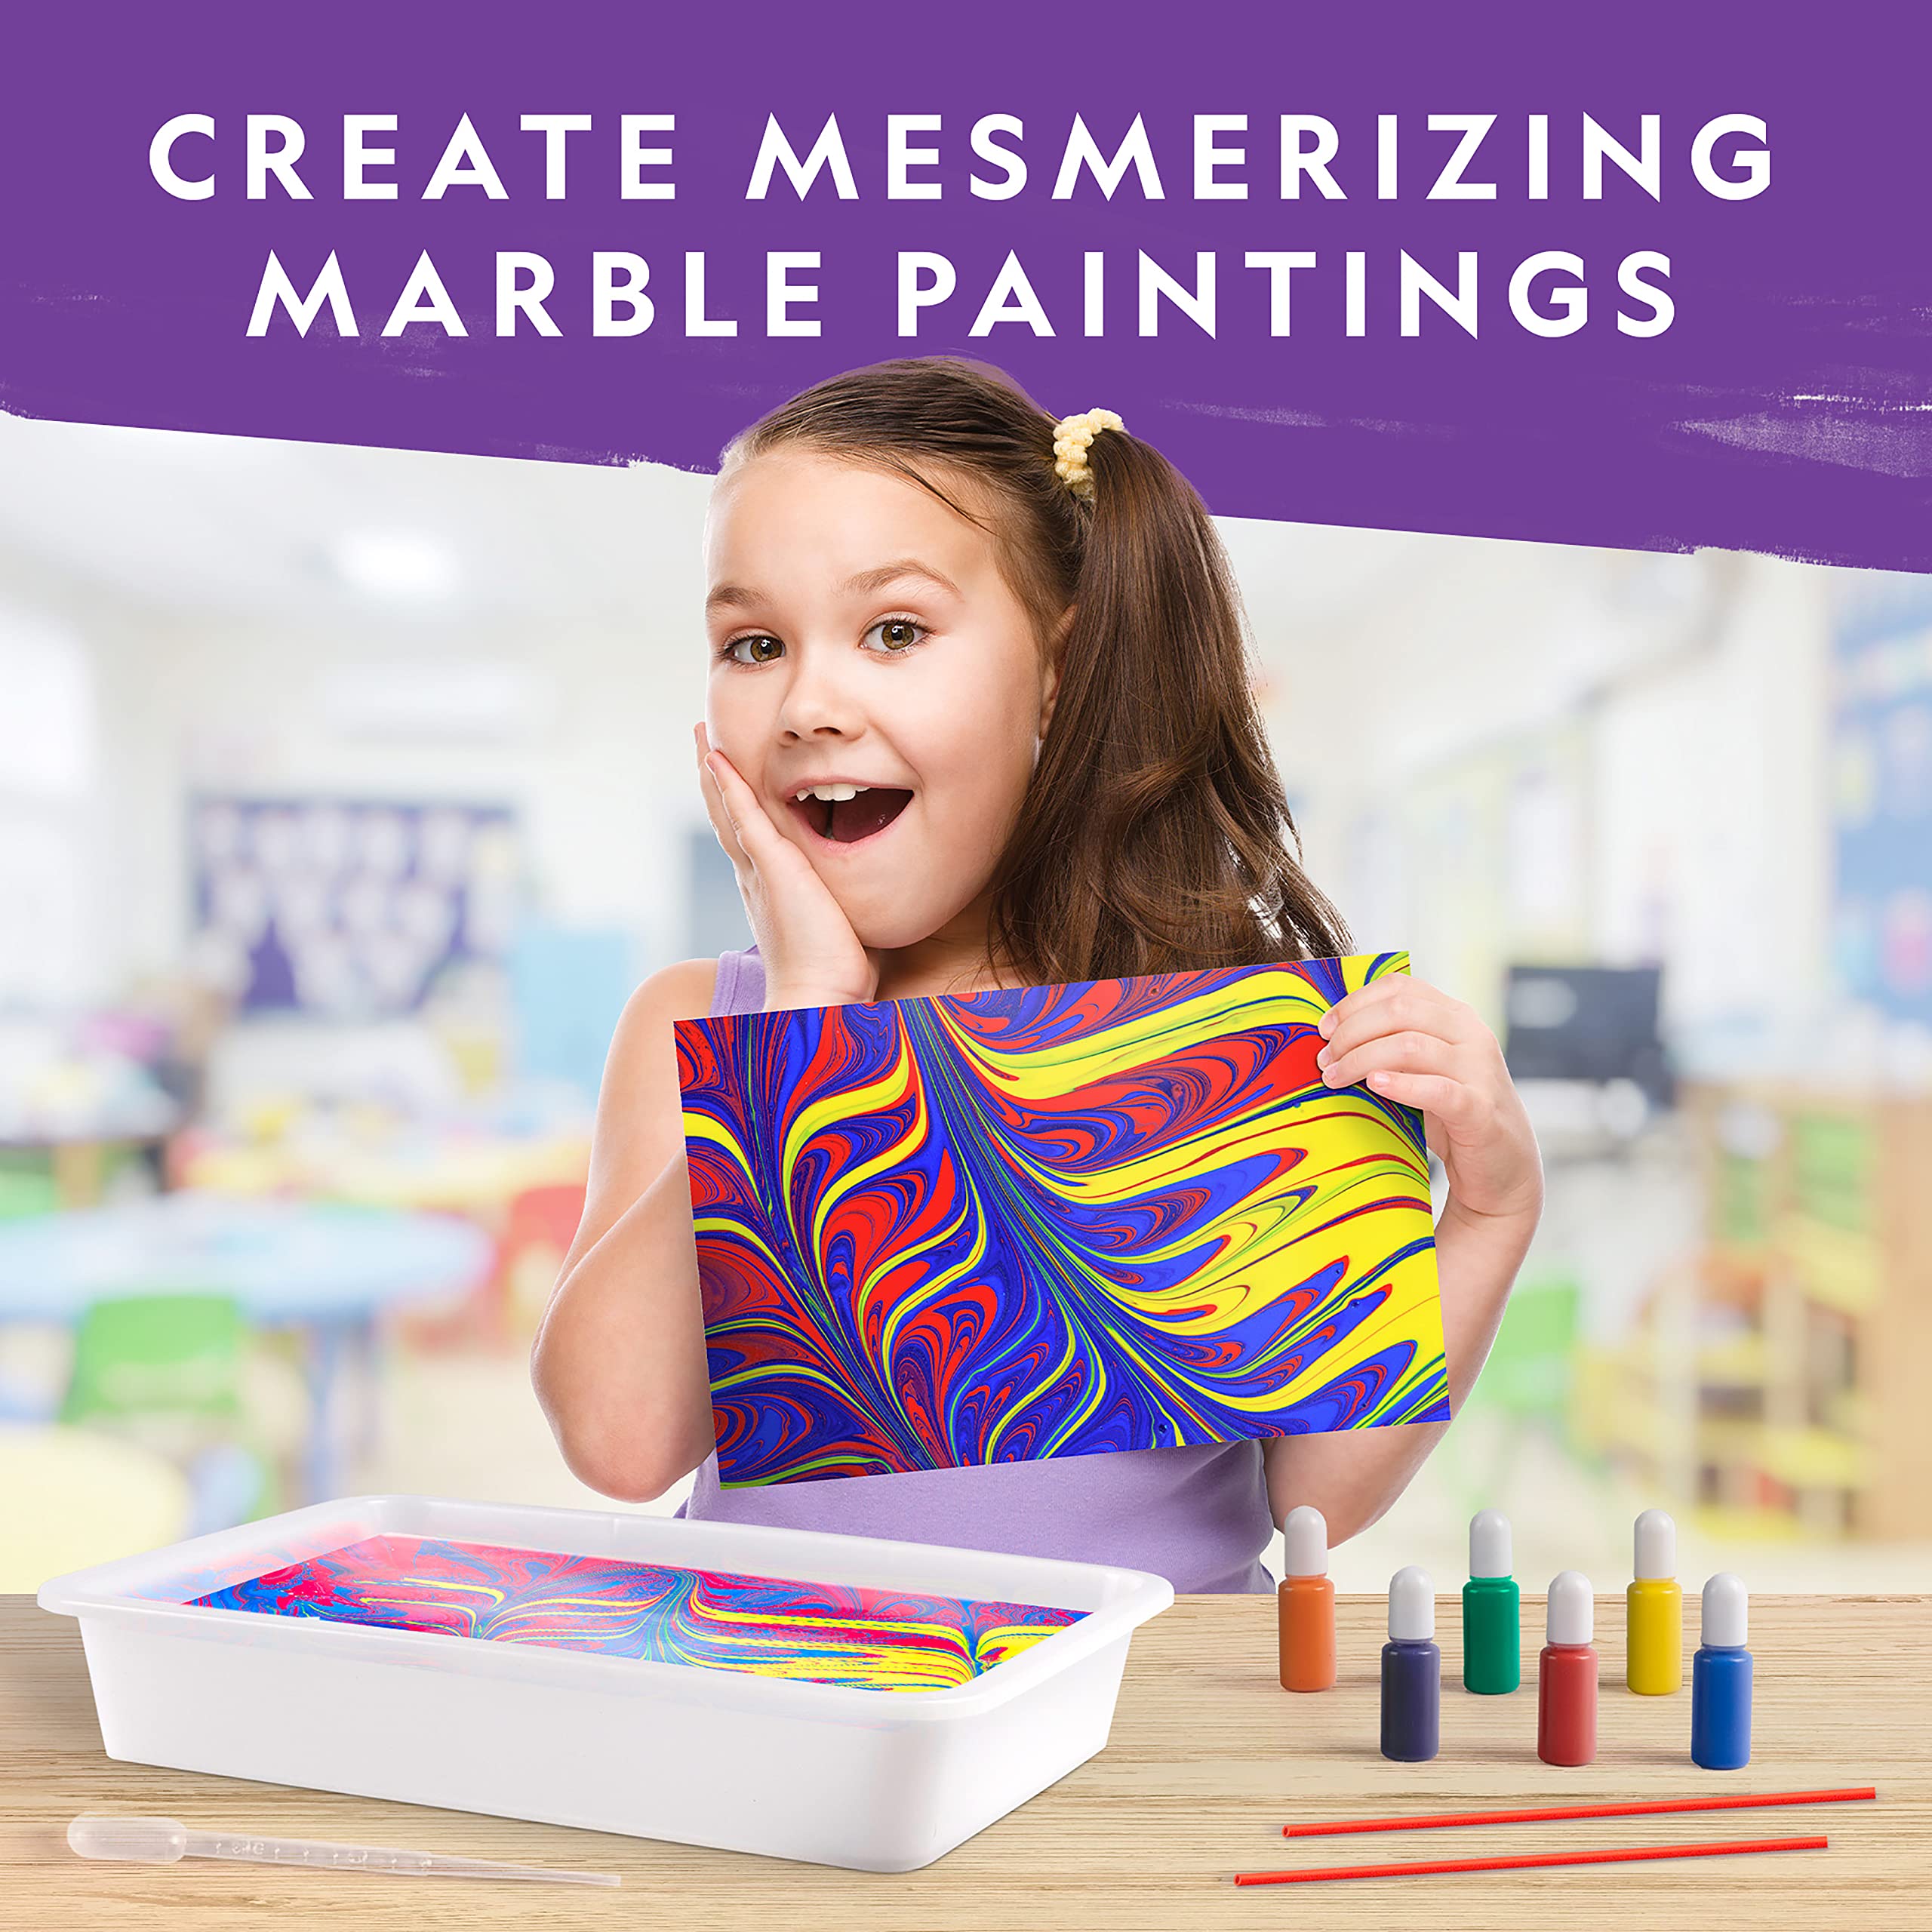 NATIONAL GEOGRAPHIC Mega Arts and Crafts Kit for Kids – Mosaic Kit, Marbling Paint Kit & Air Dry Clay Pottery Kit – Art Projects for Kids Ages 8-12, Crafts for Girls and Boys (Amazon Exclusive)